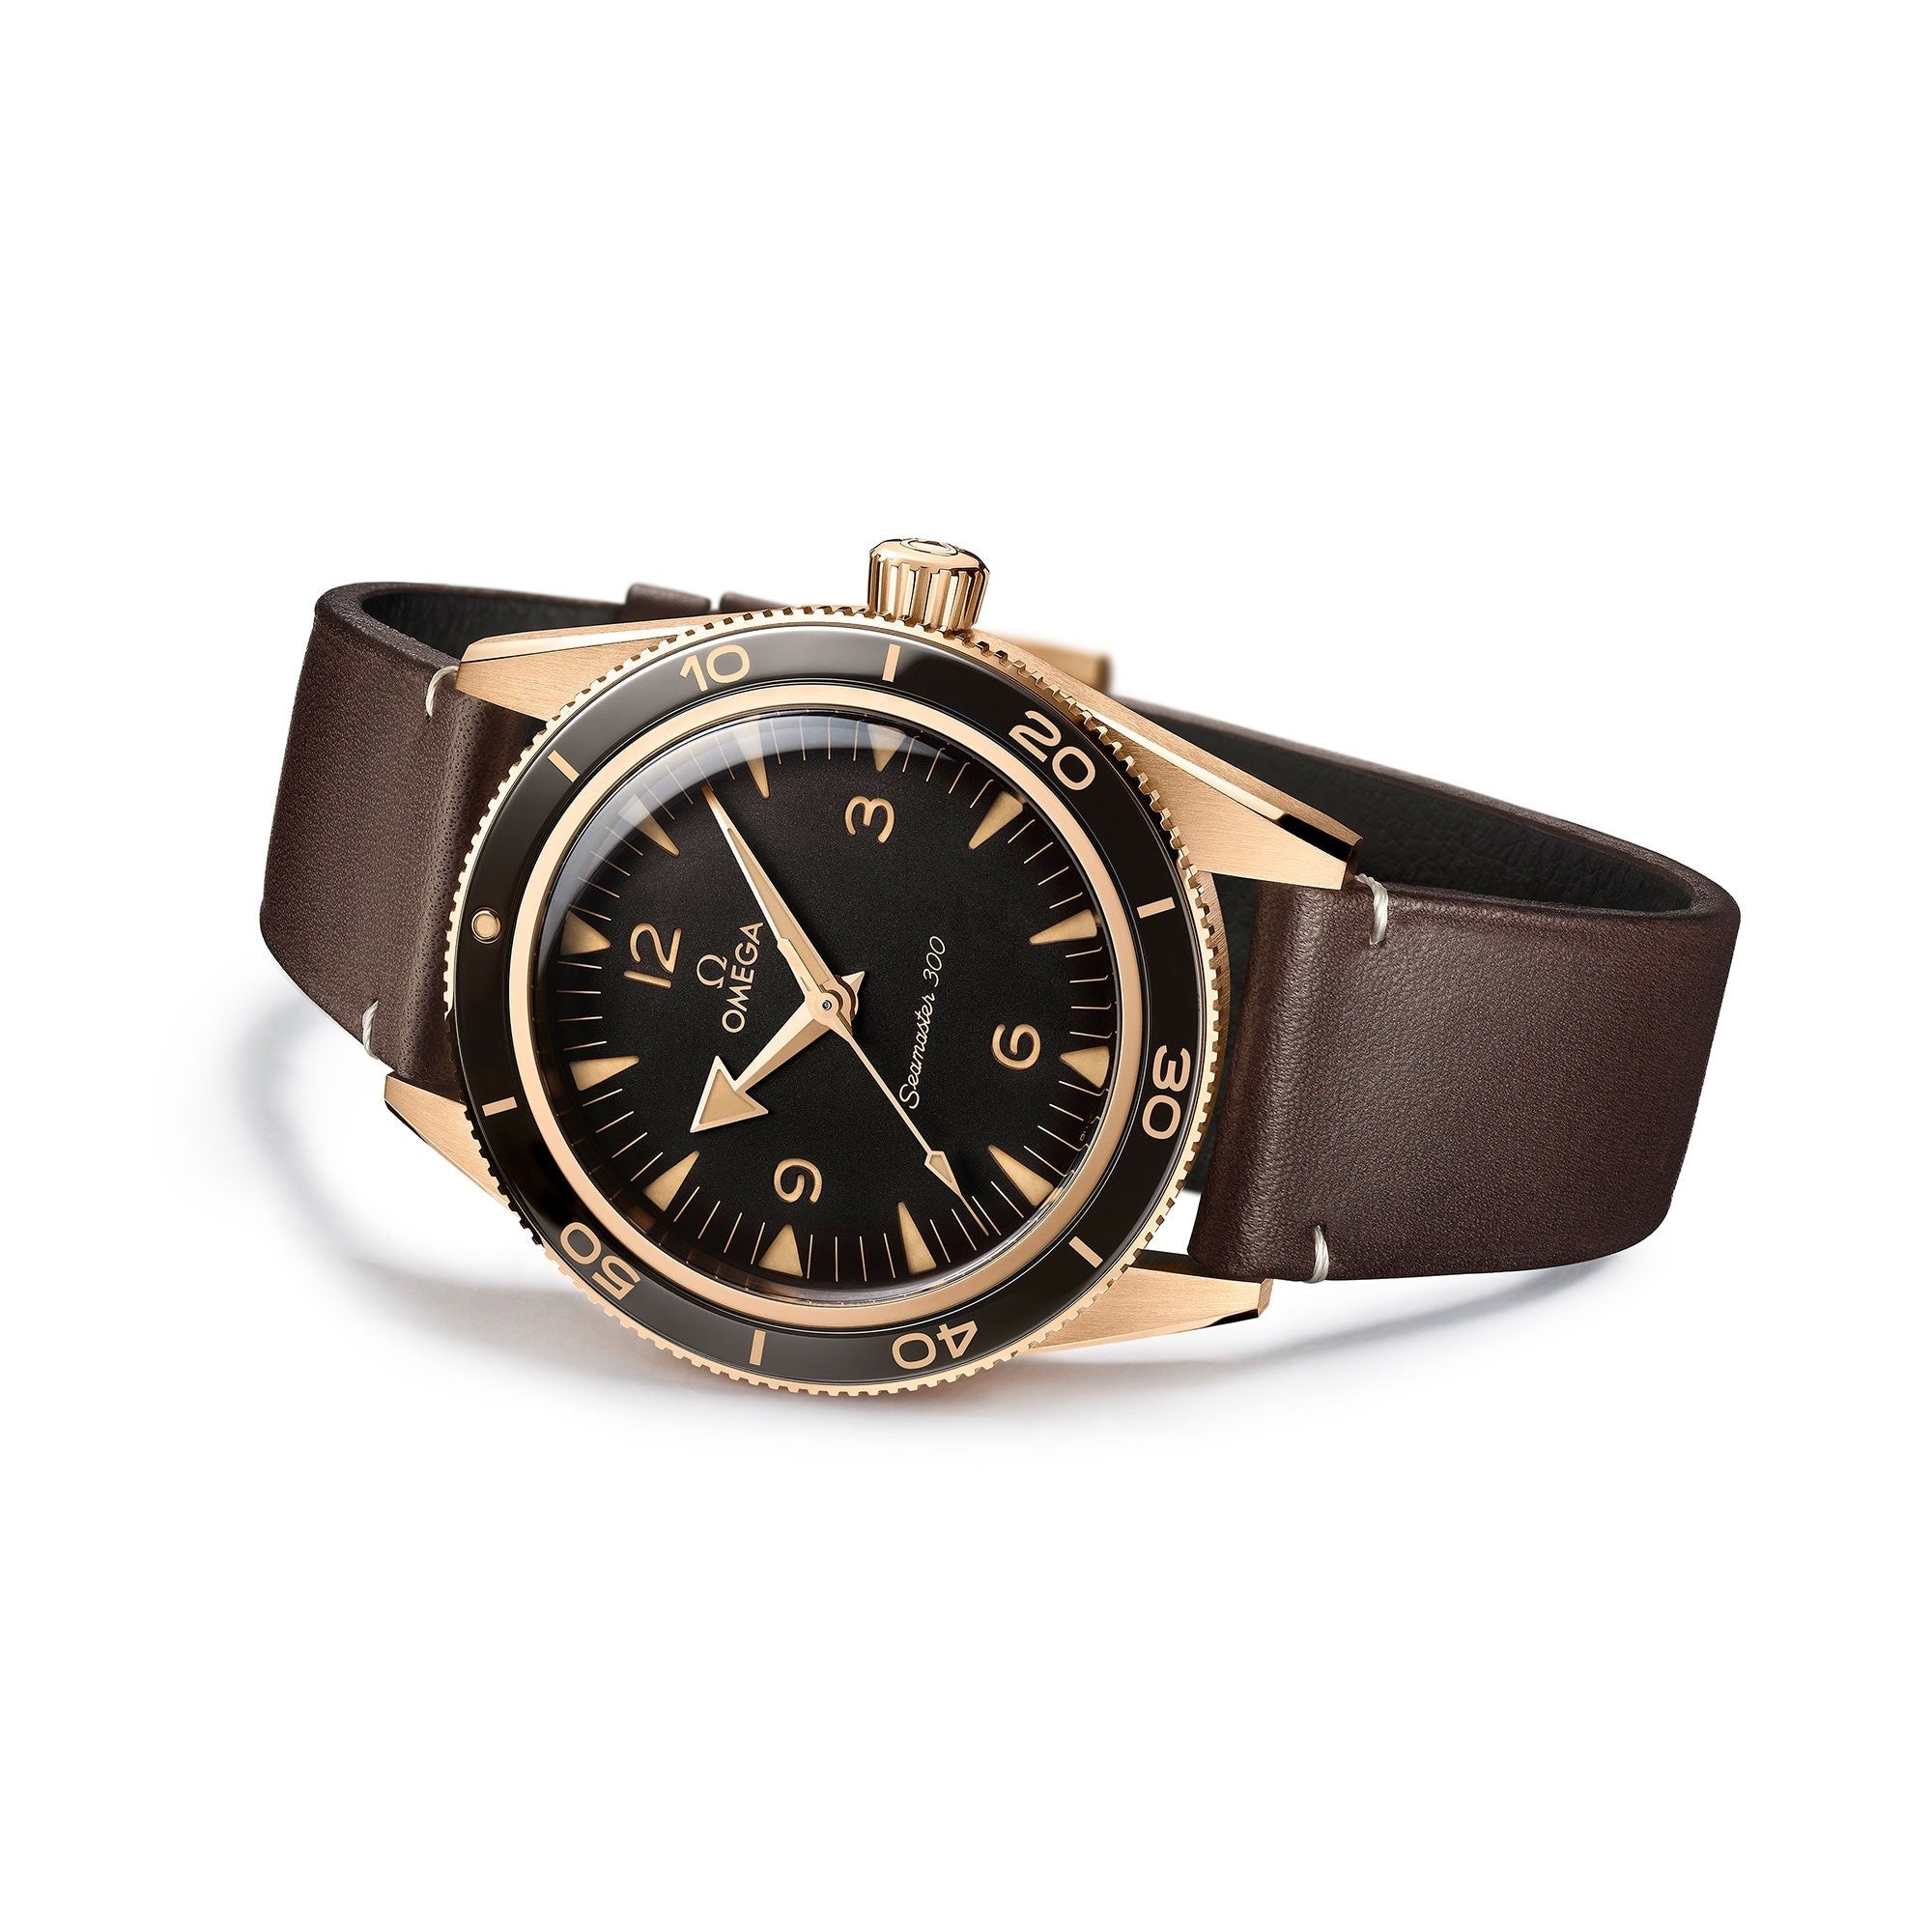 Omega Seamaster 300 Co-Axial 41mm | Mechanical Watch | Harley's Time LLC